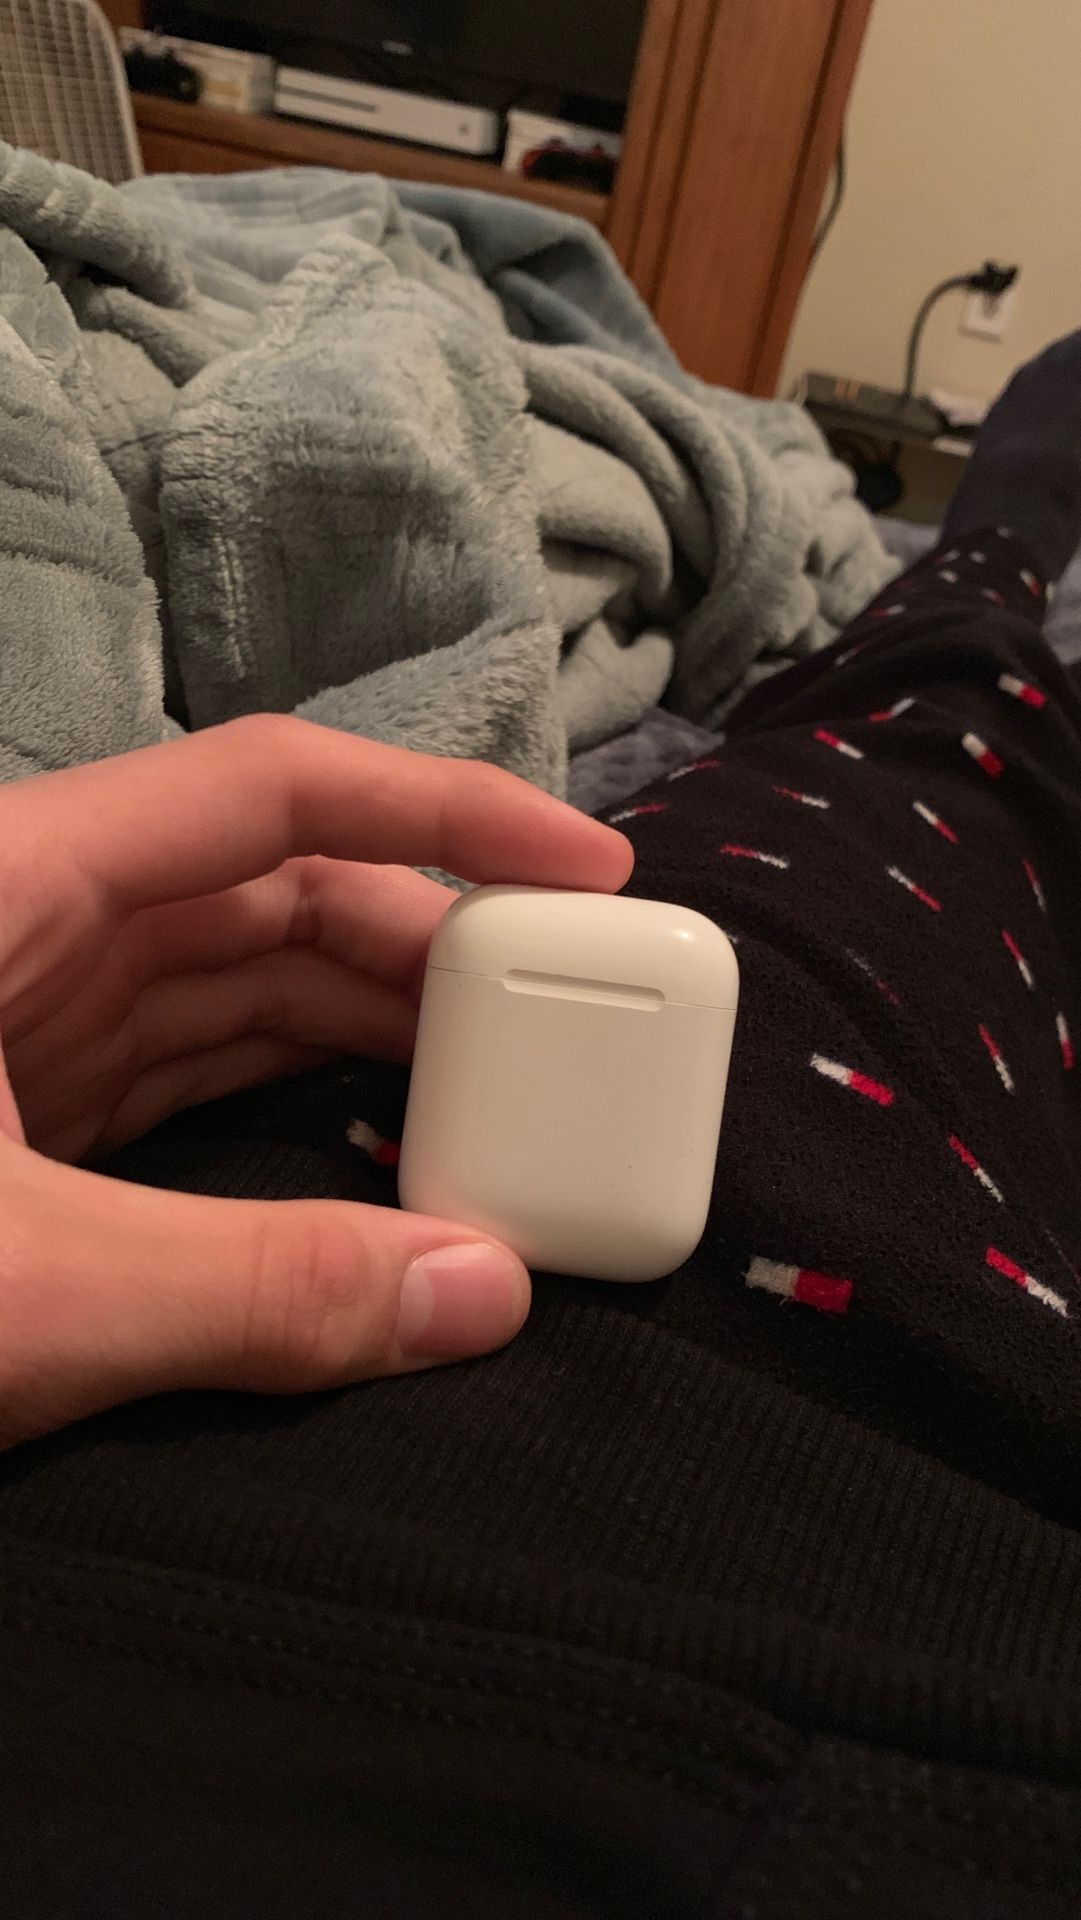 Apple AirPods 1st generation